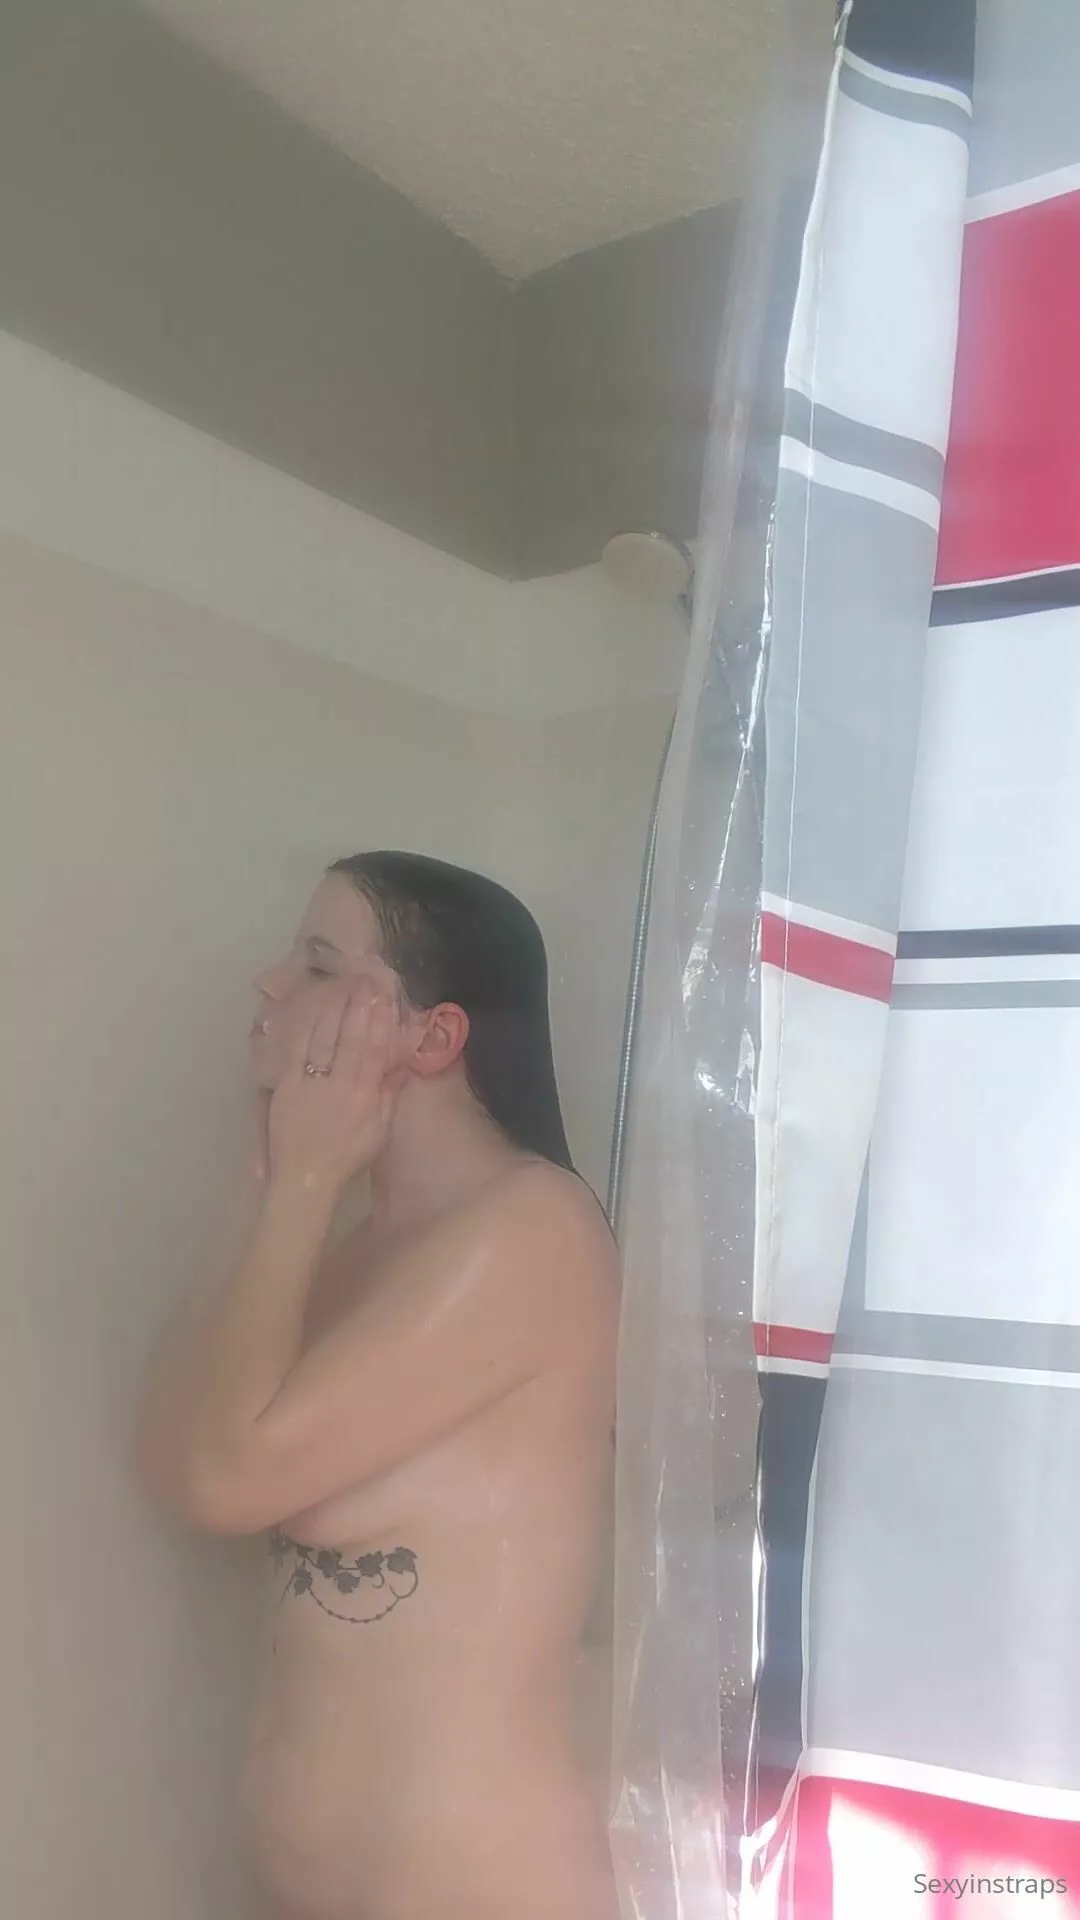 Sexyinstraps come watch me shower peeping tom voyeur style xxx onlyfans porn videos